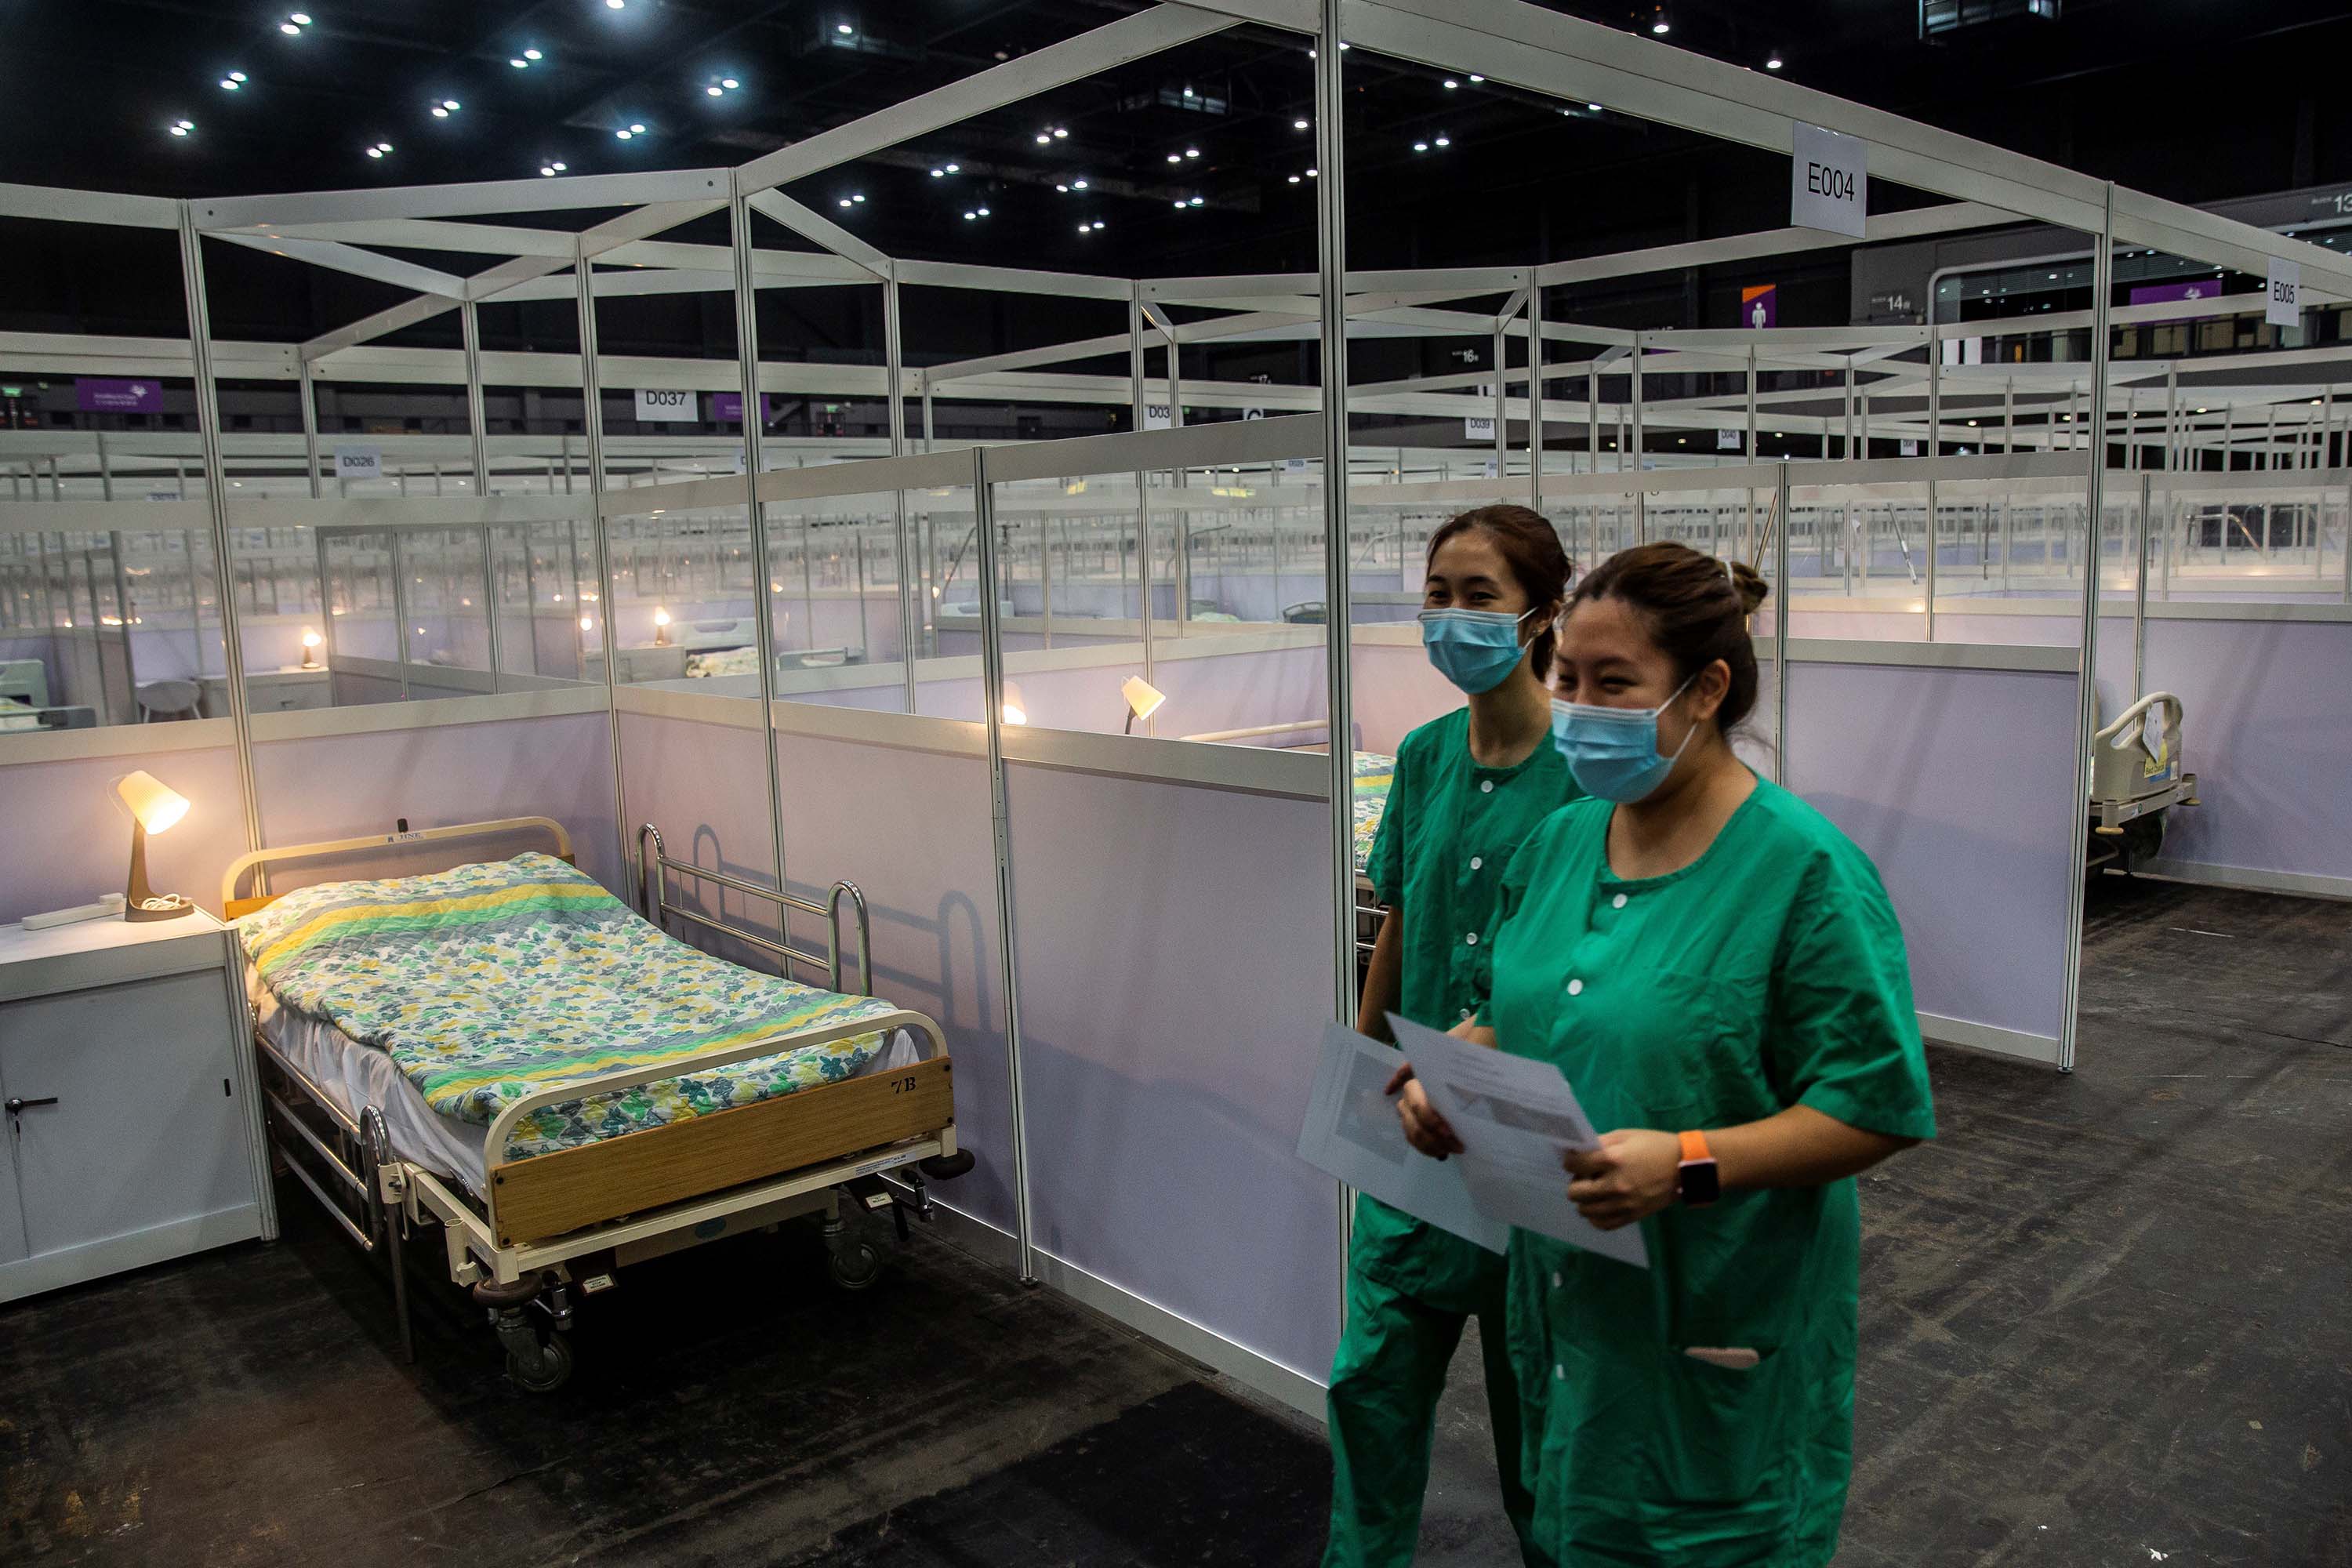 Medical workers walk past rows of beds at a temporary field hospital set up to house Covid-19 patients in Hong Kong, on August 1.